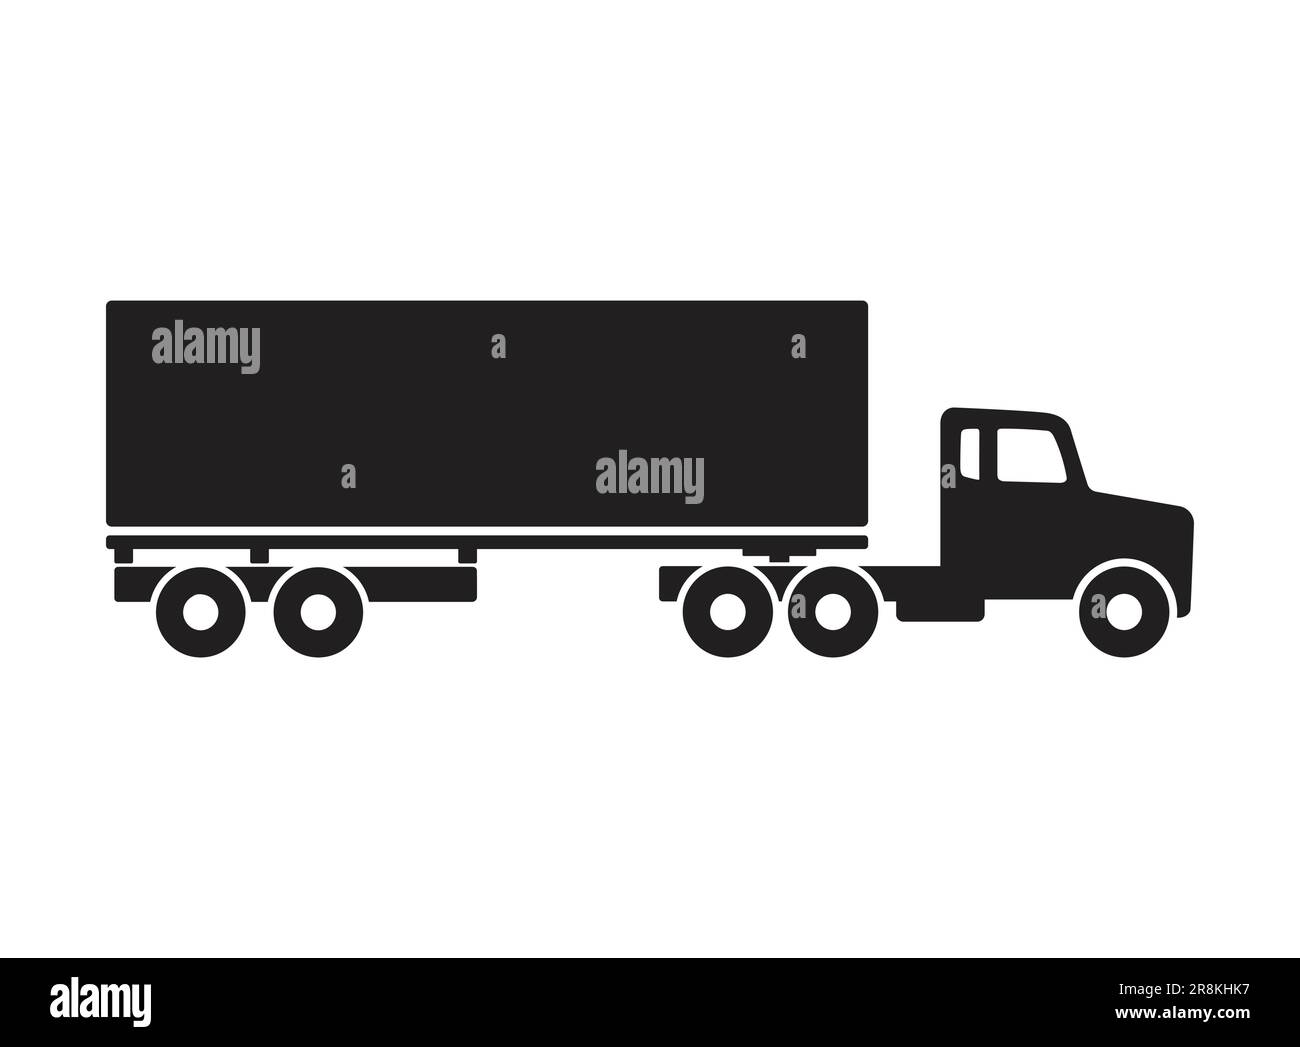 simple semi trailer long nose mid sized container truck articulated black silhouette side view icon symbol vector isolated on white background Stock Vector